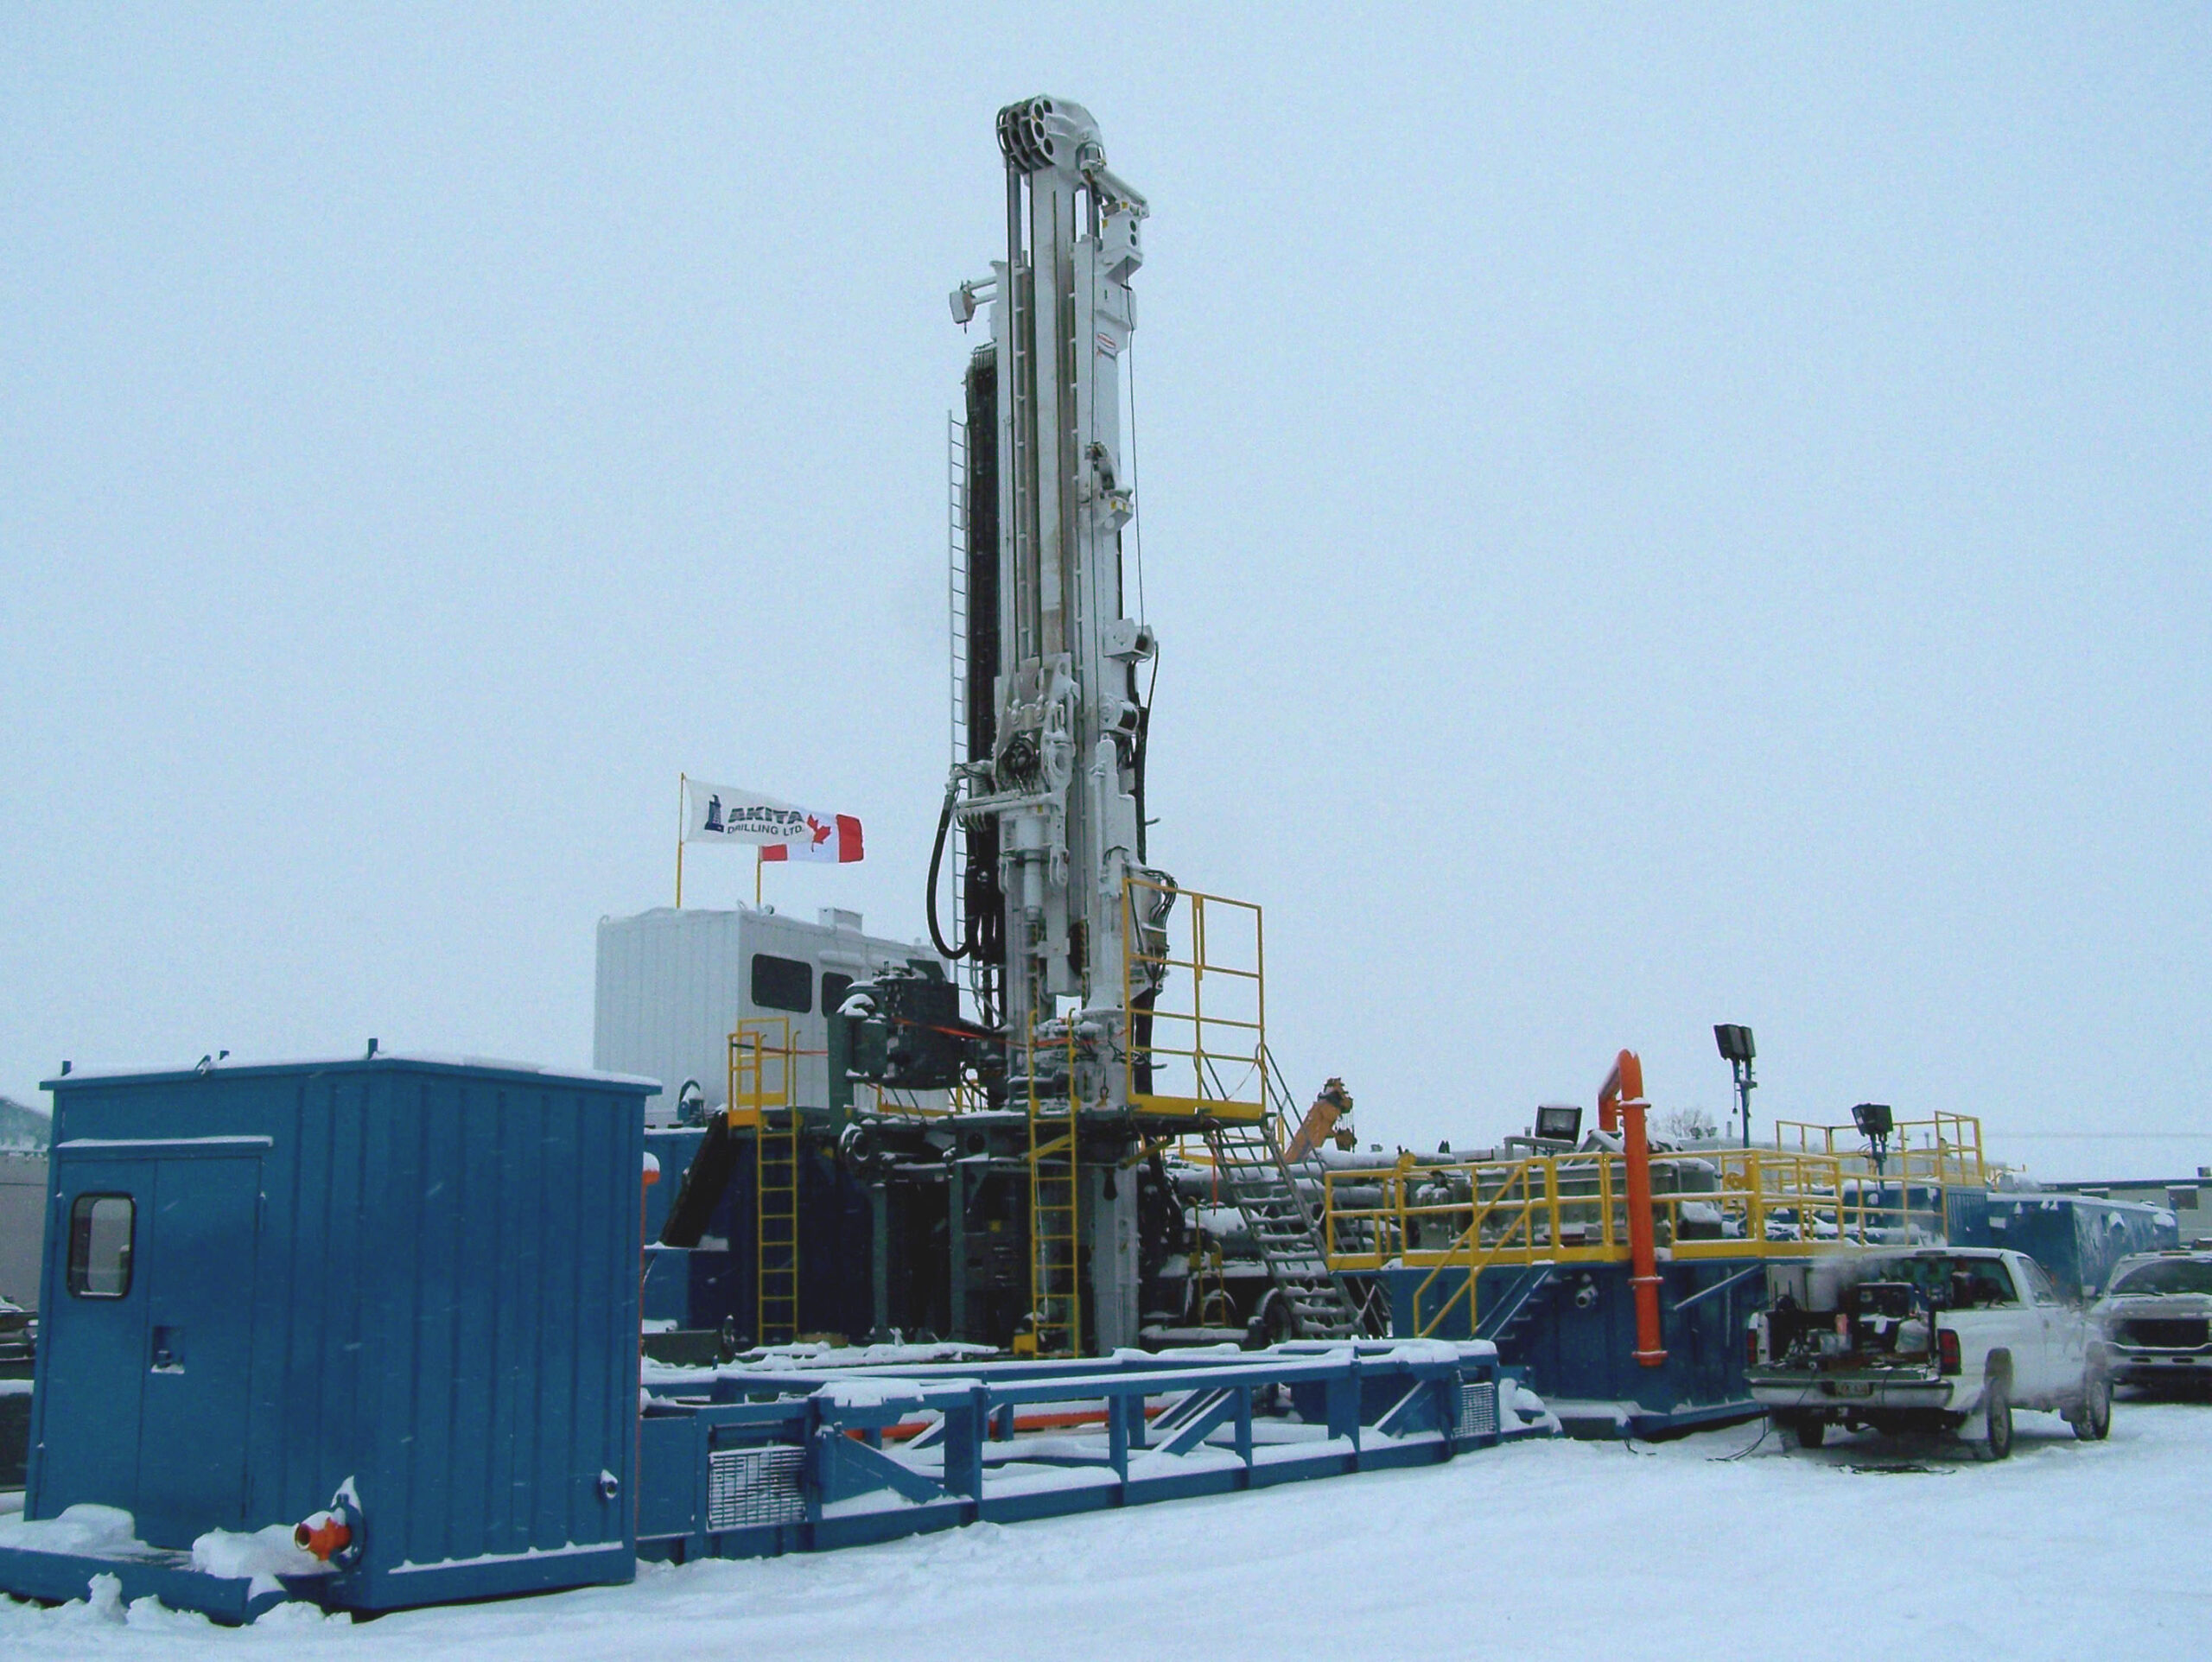 Schramm Telemast TXD Drill Rig surrounded by snow.